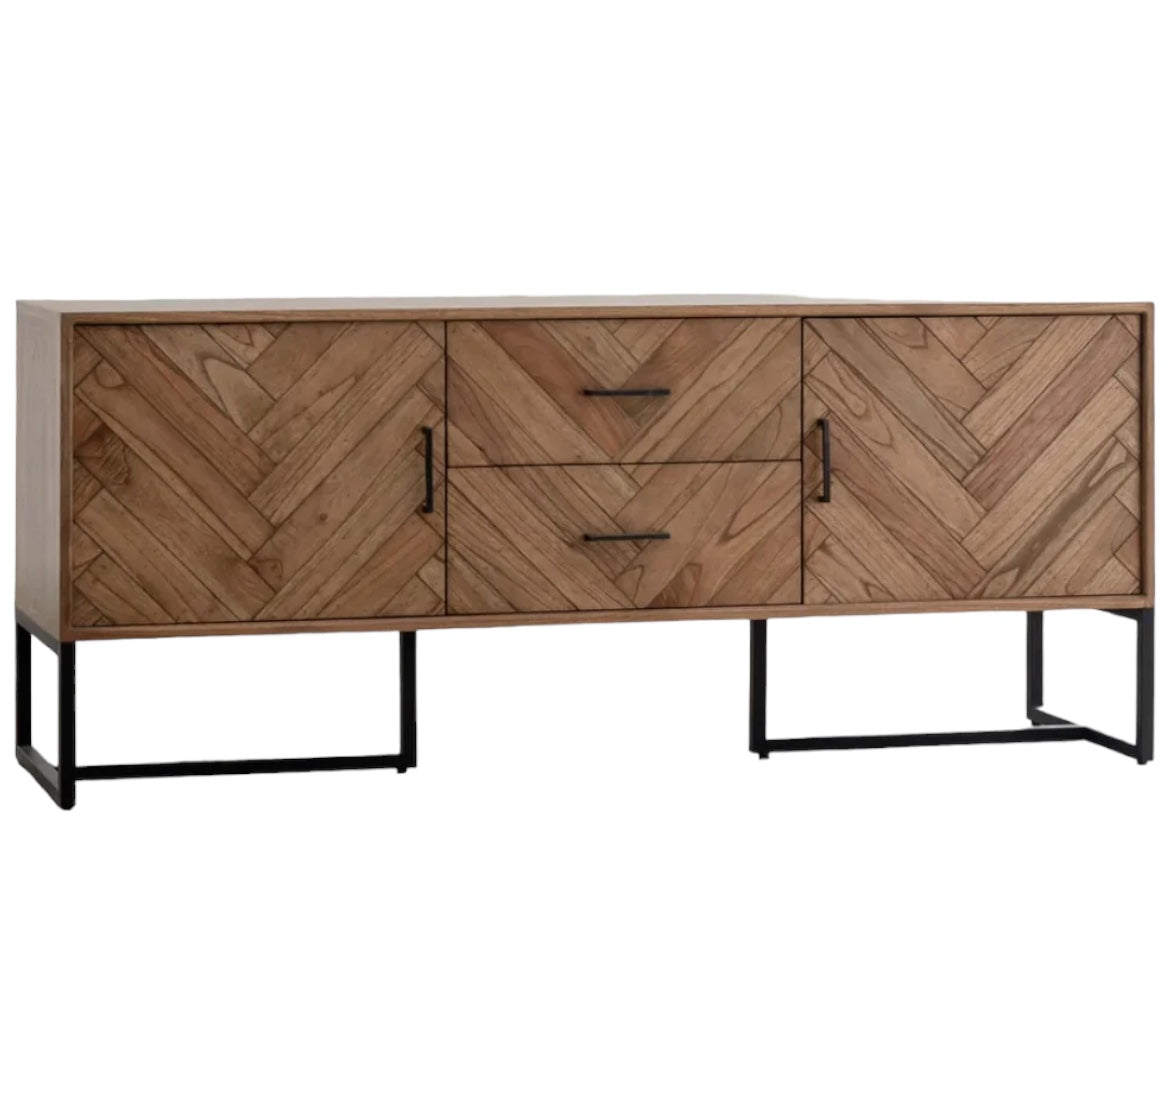 HAND MADE AXEL SCANDINAVIAN INSPIRED WOODEN SIDEBOARD CONSOLE